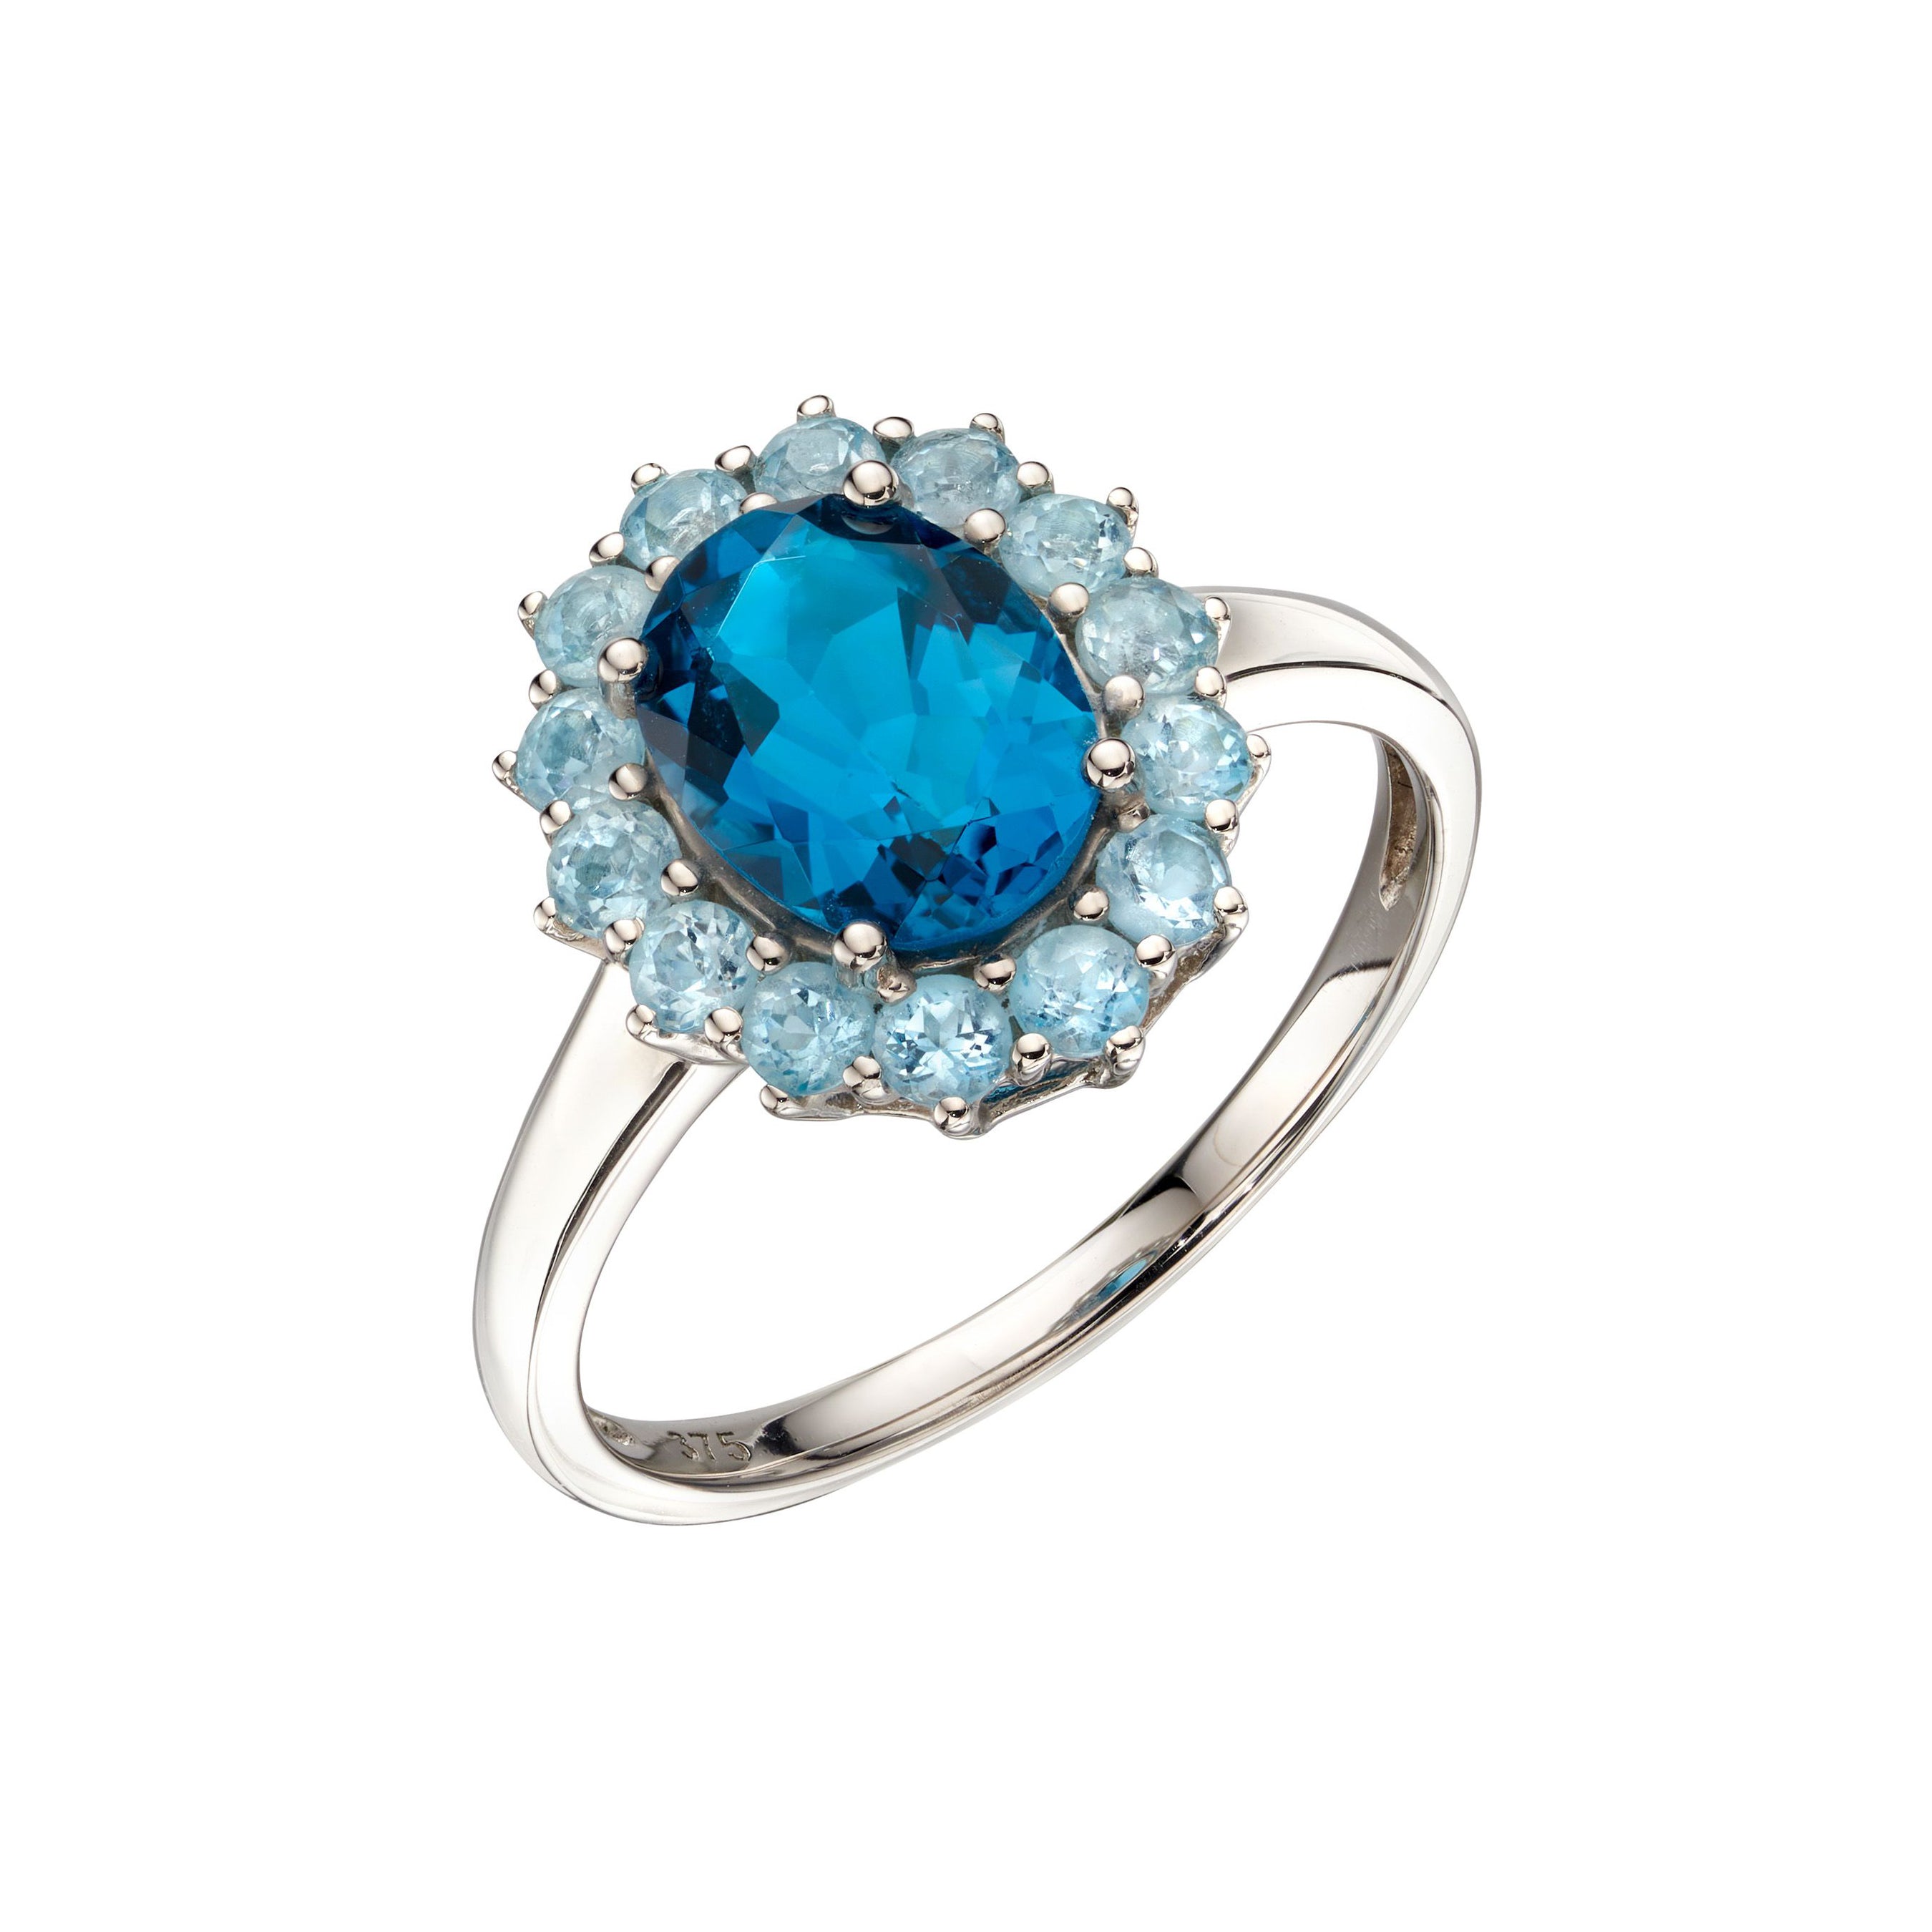 Statement Blue Topaz Ring in 9ct White Gold